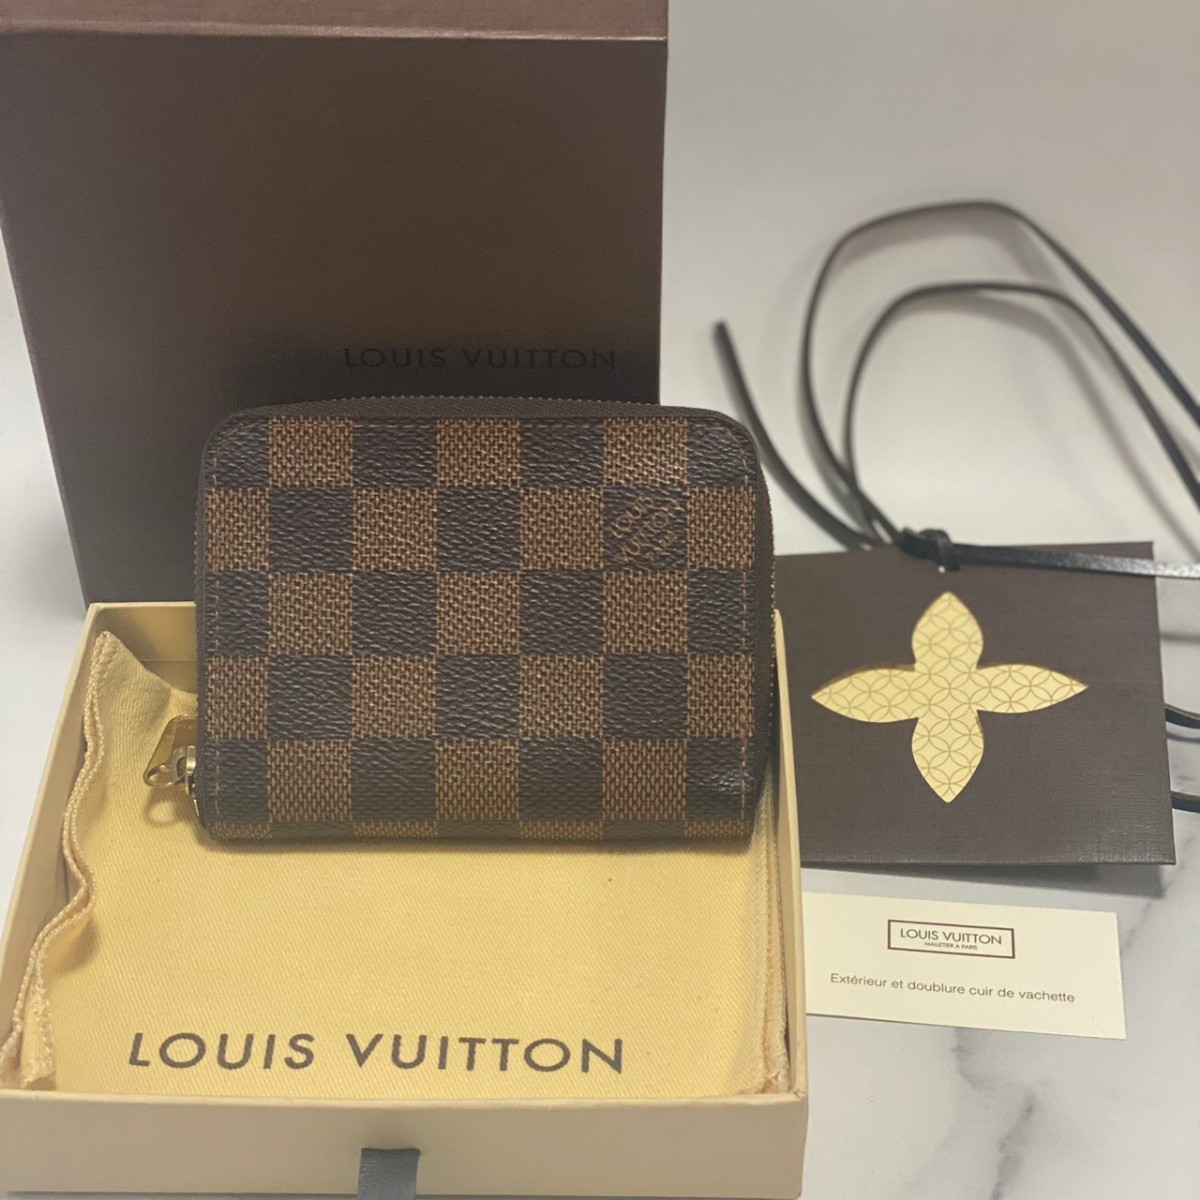 0885　LOUIS VUITTON ルイヴィトン　ジッピー・コイン パース N63070　ダミエ　ジッピーコインパース　小銭入れ　カードケース